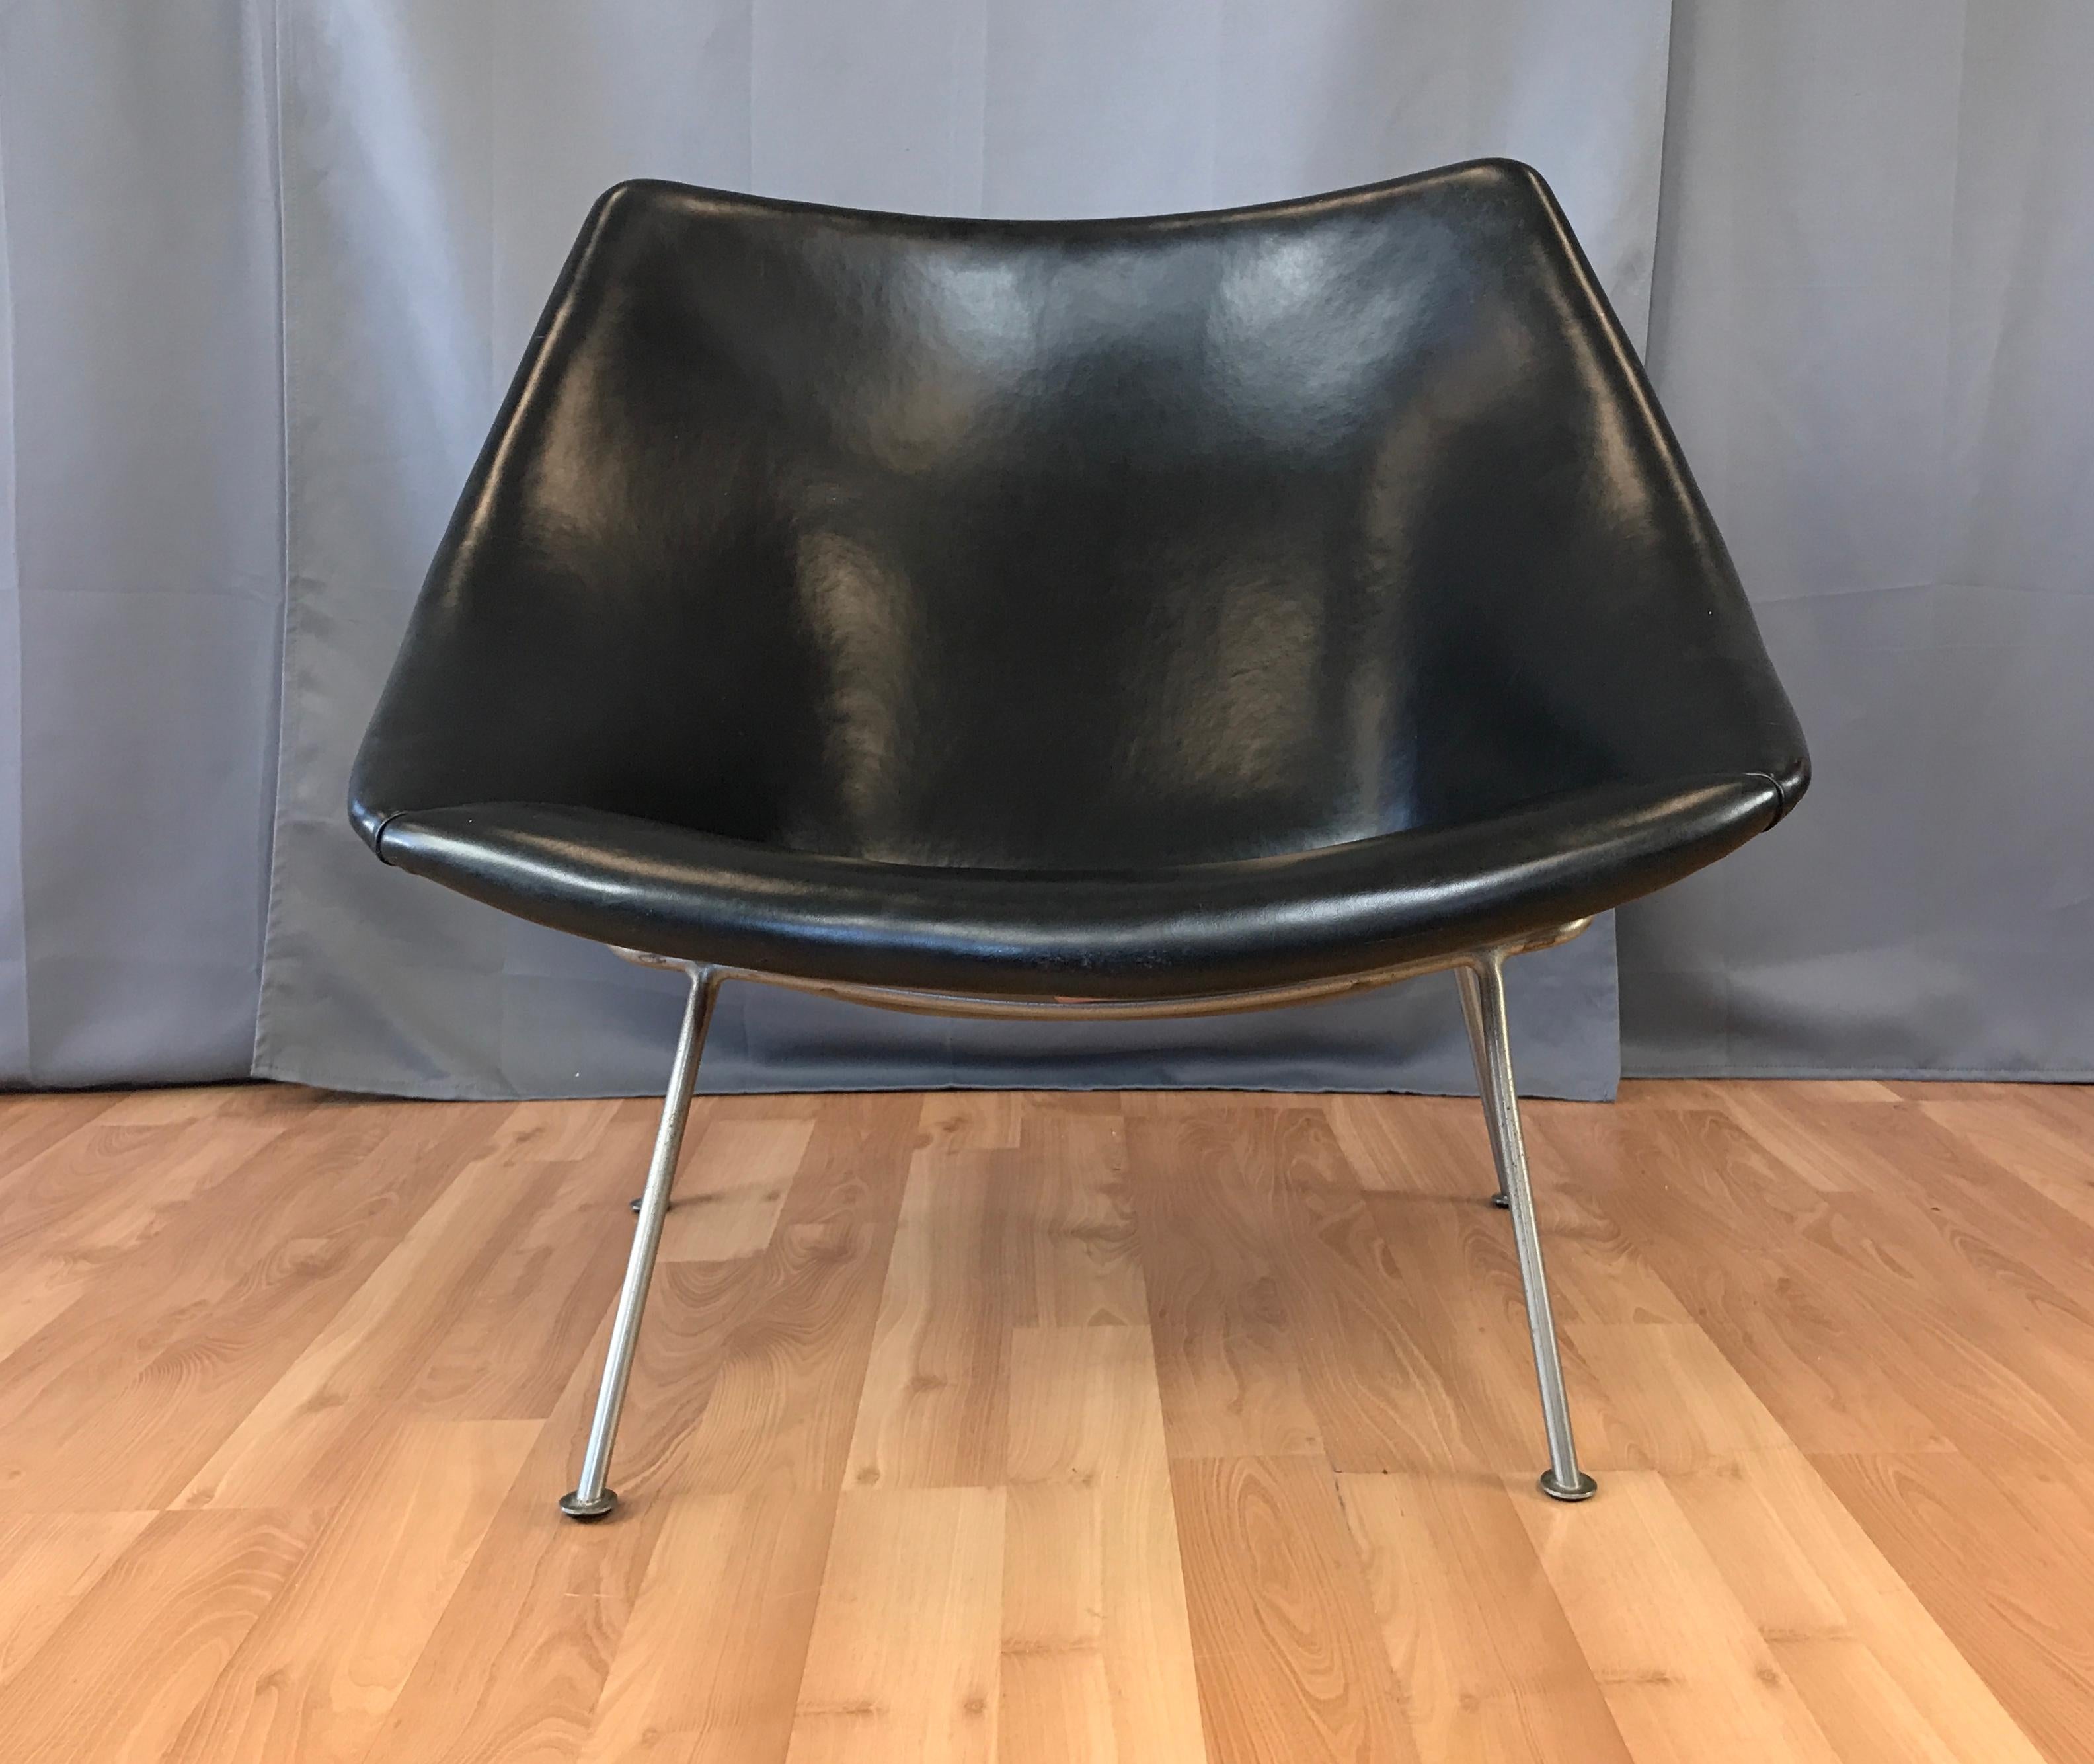 An early 1960s model F156 Oyster easy chair by Pierre Paulin for Artifort.

Broad bentwood frame seat upholstered front and back in original black leather. Floats on minimalist metal rod base with disc feet. Retains manufacturer/designer and